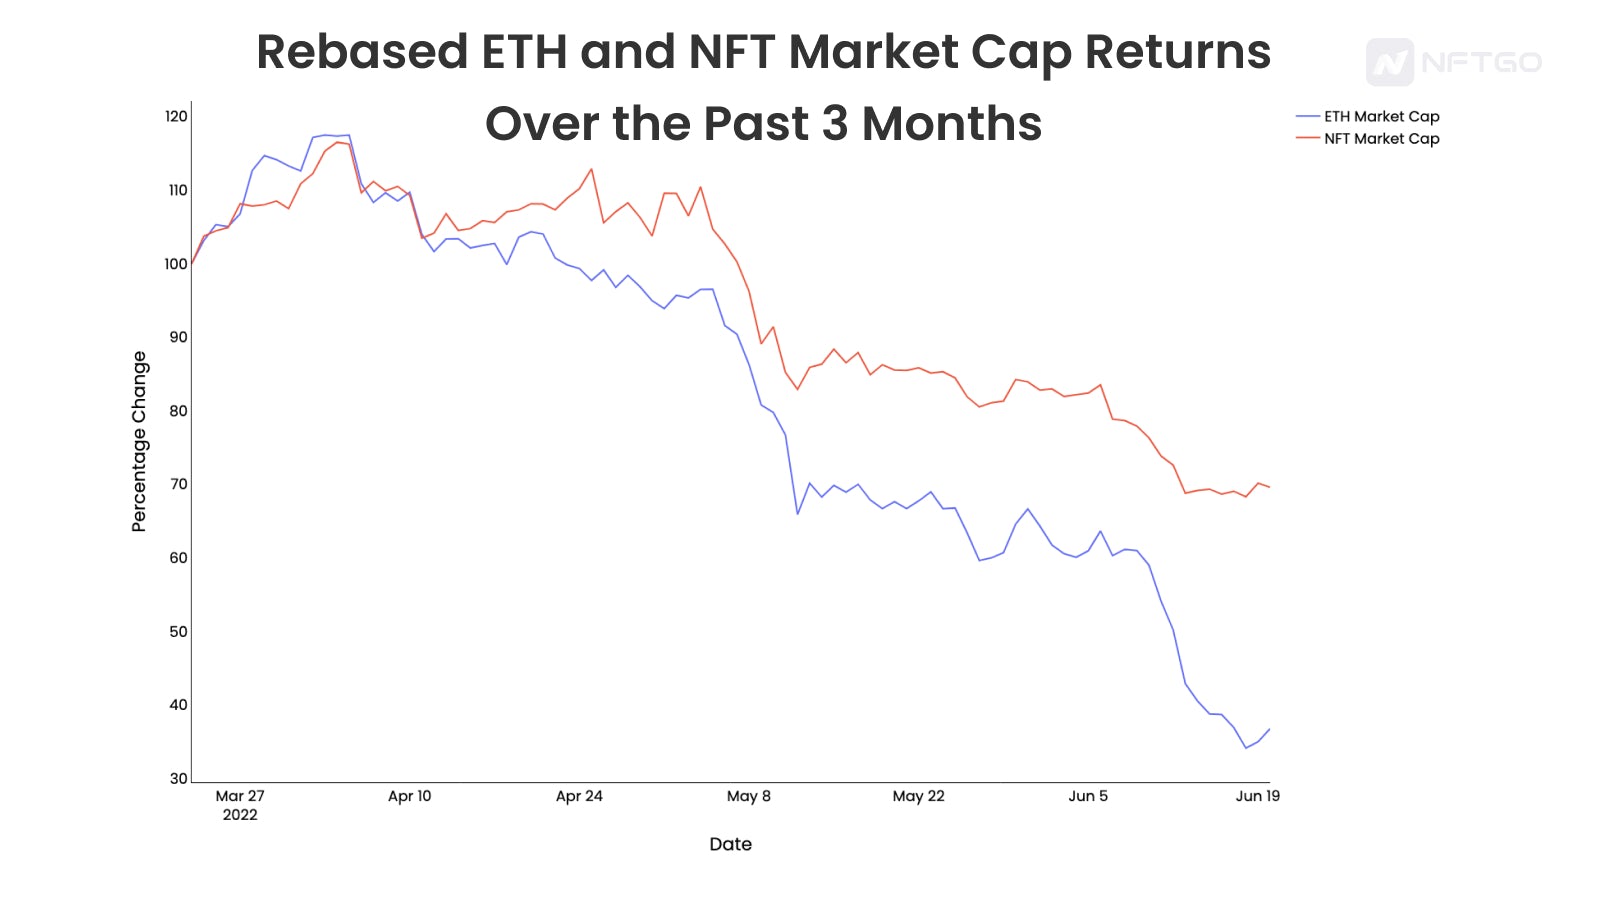 Rebased ETH and NFT Market Cap Returns Over the Past 3 Months 